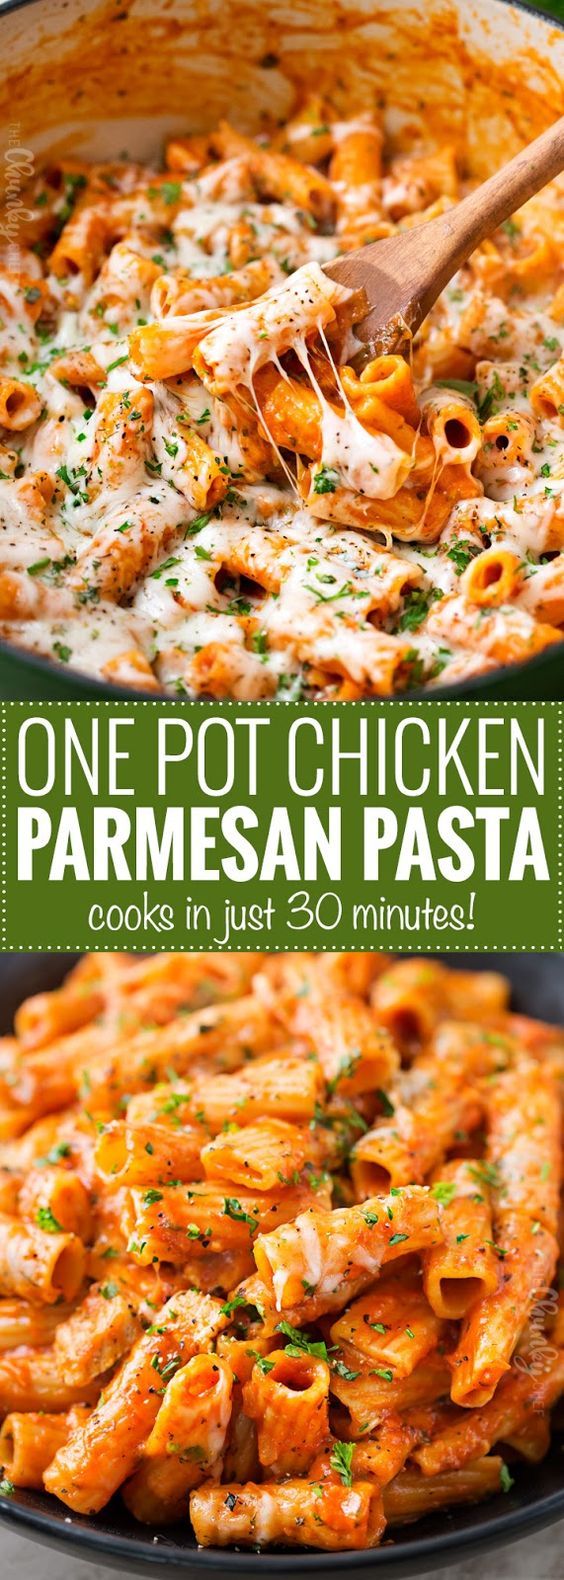 One Pot Chicken Parmesan Pasta. All the great chicken parmesan flavors, combined in one easy one pot pasta dish that's ready in 30 minutes! Less dishes, but a meal with maximum flavor!